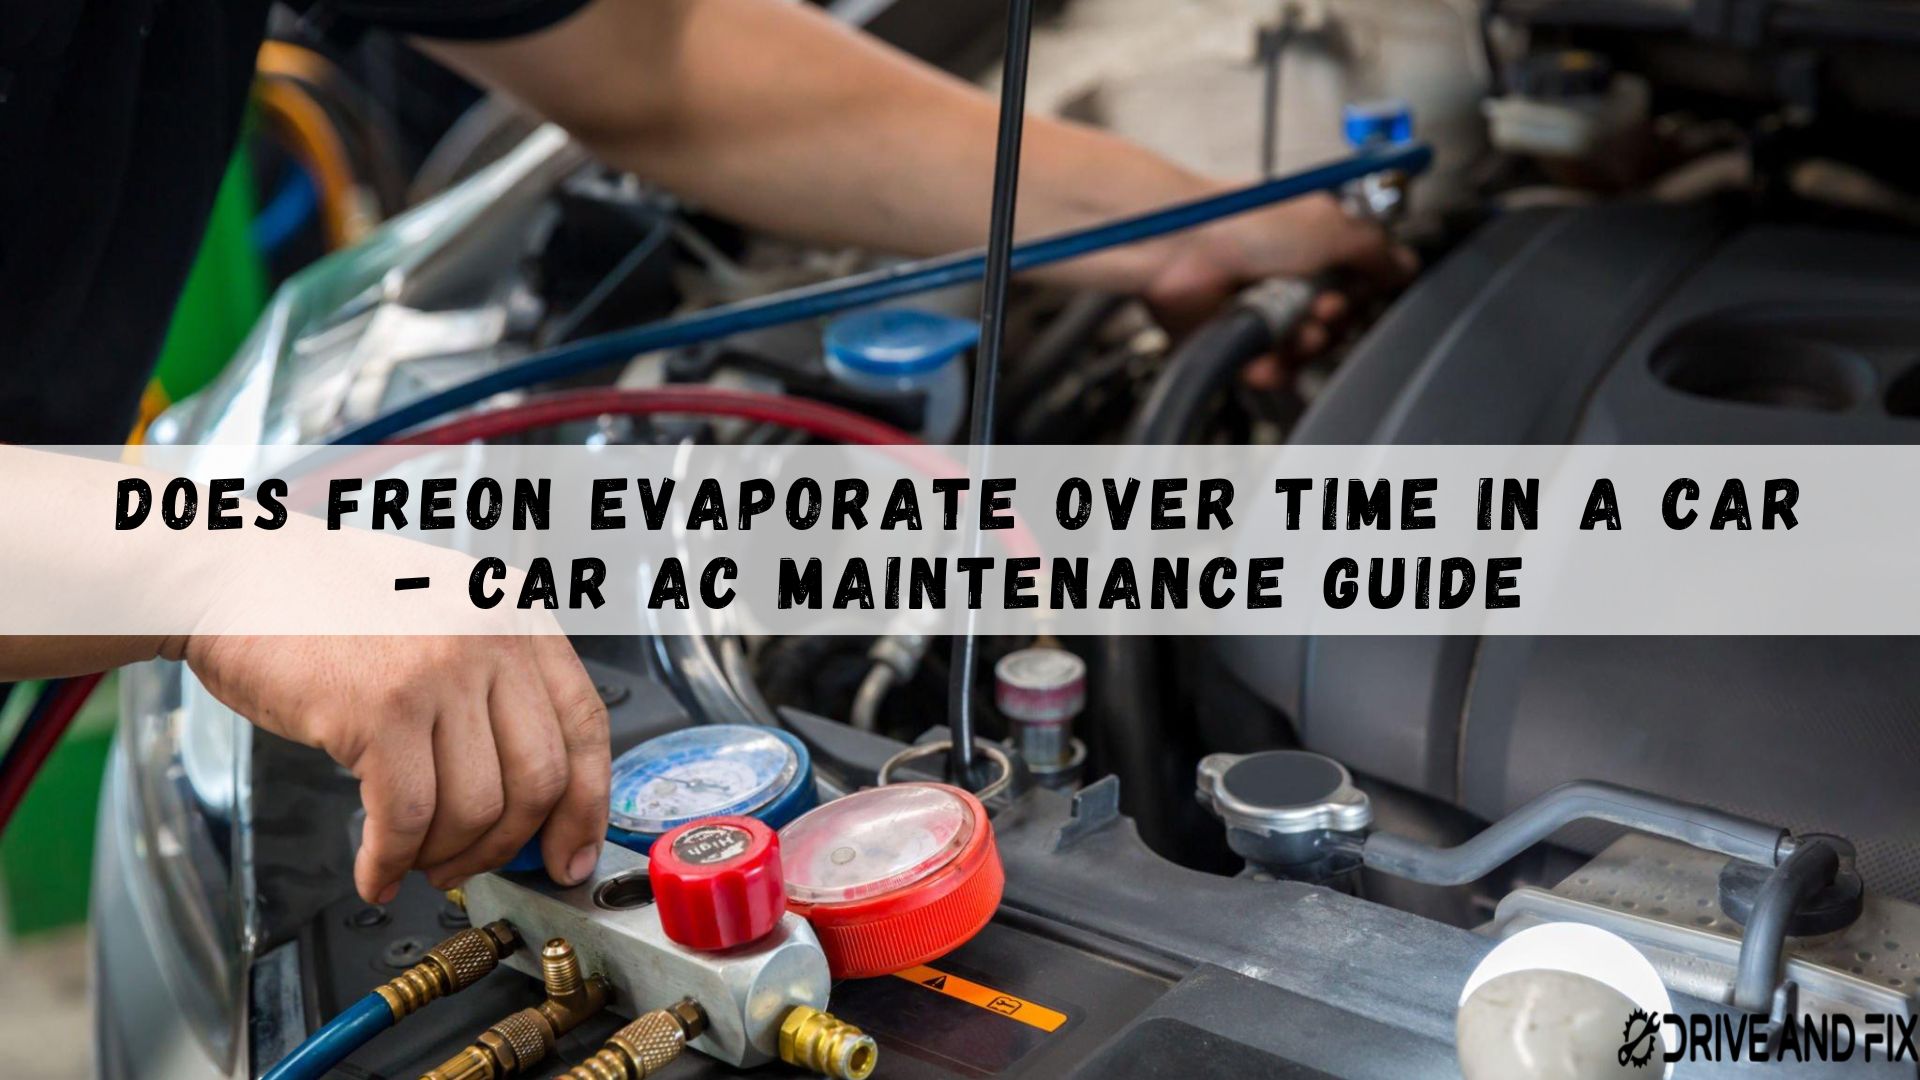 Does Freon evaporate over time in a car